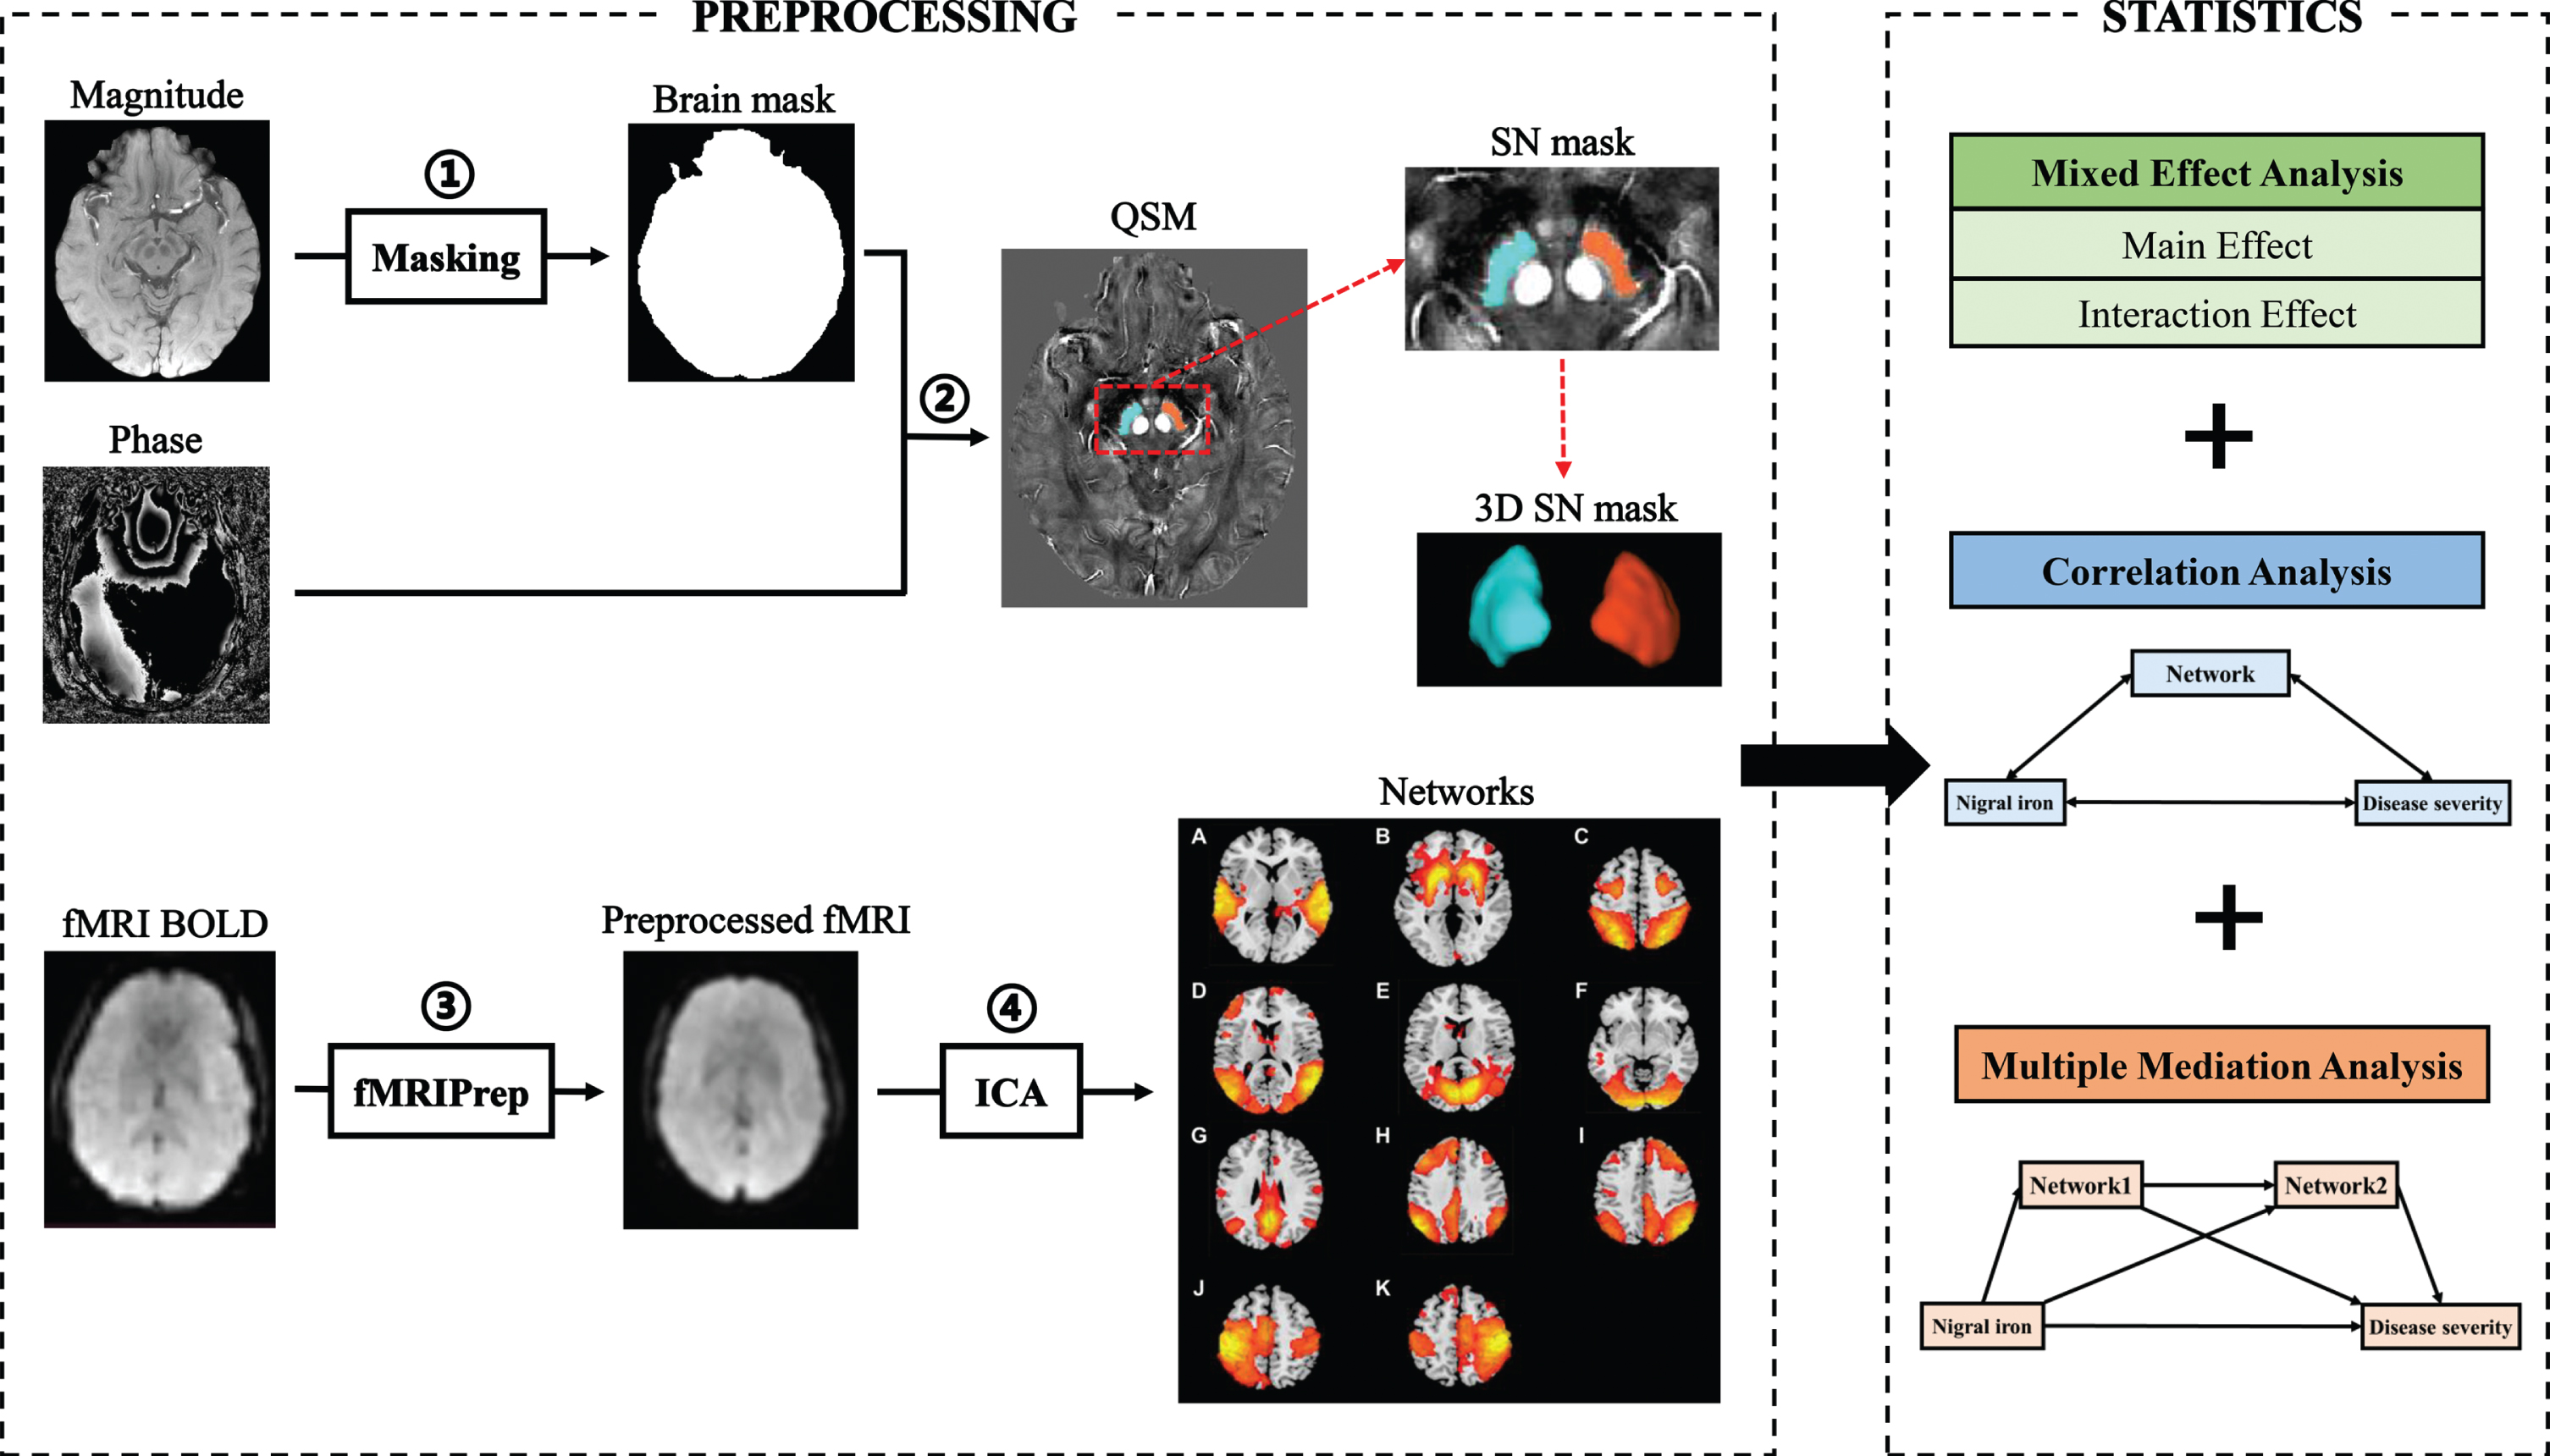 Flow chart of data processing and analysis. Magnitude and phase images are acquired with GRE sequence. The magnitude image is used to create a brain mask (①). The QSM image was generated by using phase image and the brain mask (②). The rsfMRI processing is performed using fMRIPrep (③). All preprocessed rsfMRI data are analyzed using ICA (④). Smith’s template was used to identify 11 brain networks from 49 estimated components, including auditory network (A), basal ganglia network (B), dorsal attention network (C), lateral visual network (D), medial visual network (E), occipital visual network (F), default mode network (G), left frontoparietal network (H), right frontoparietal network (I), left sensorimotor network (J), and right sensorimotor network (K). Statistical methods include mixed effect analysis, correlation analysis, and multiple mediation analysis. GRE, gradient echo; QSM, quantitative susceptibility mapping; rsMRI, resting-state magnetic resonance imaging; ICA, independent component analysis.